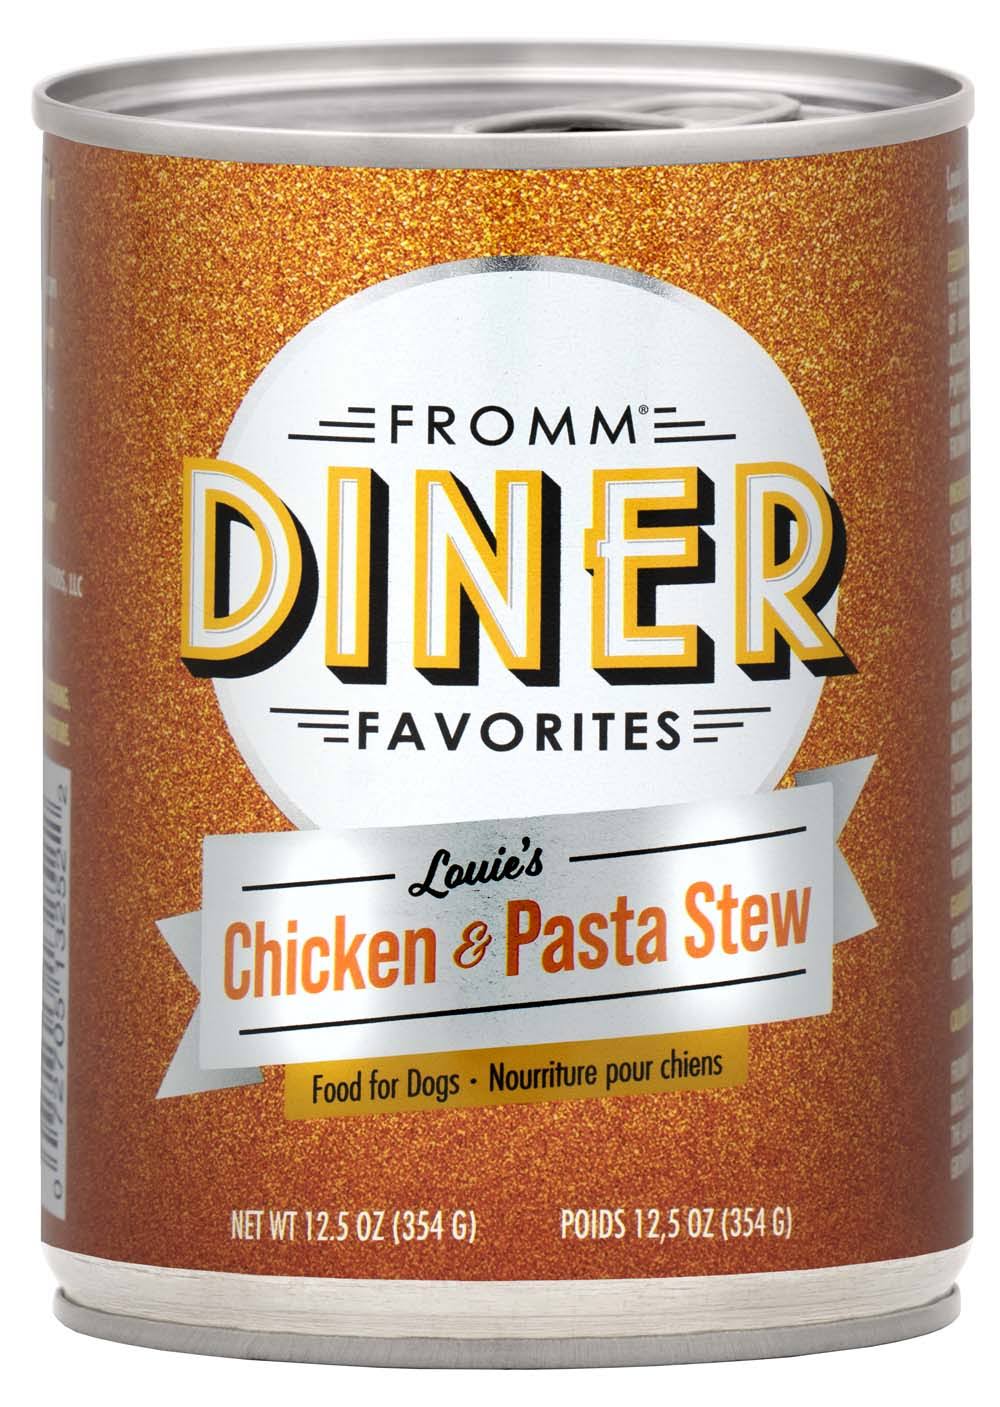 Fromm Diner Louie's Chicken & Pasta Stew Canned Dog Food 12.5oz